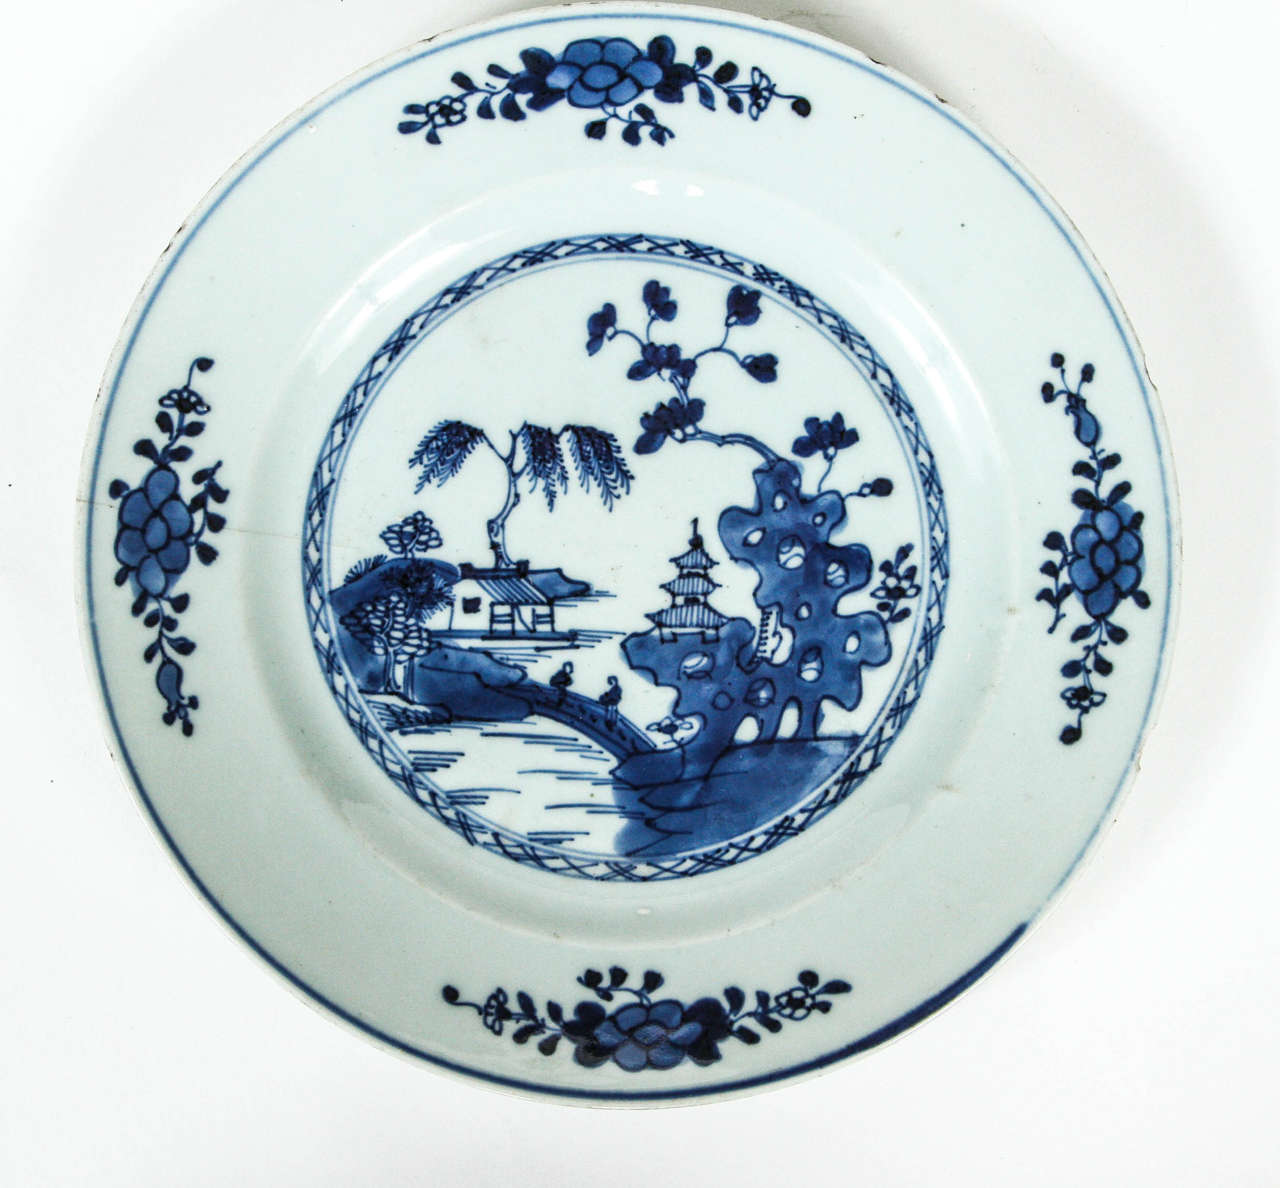 A Chinese blue and white porcelain plate, 19th Century From a collection of ten plates available in assorted patterns.